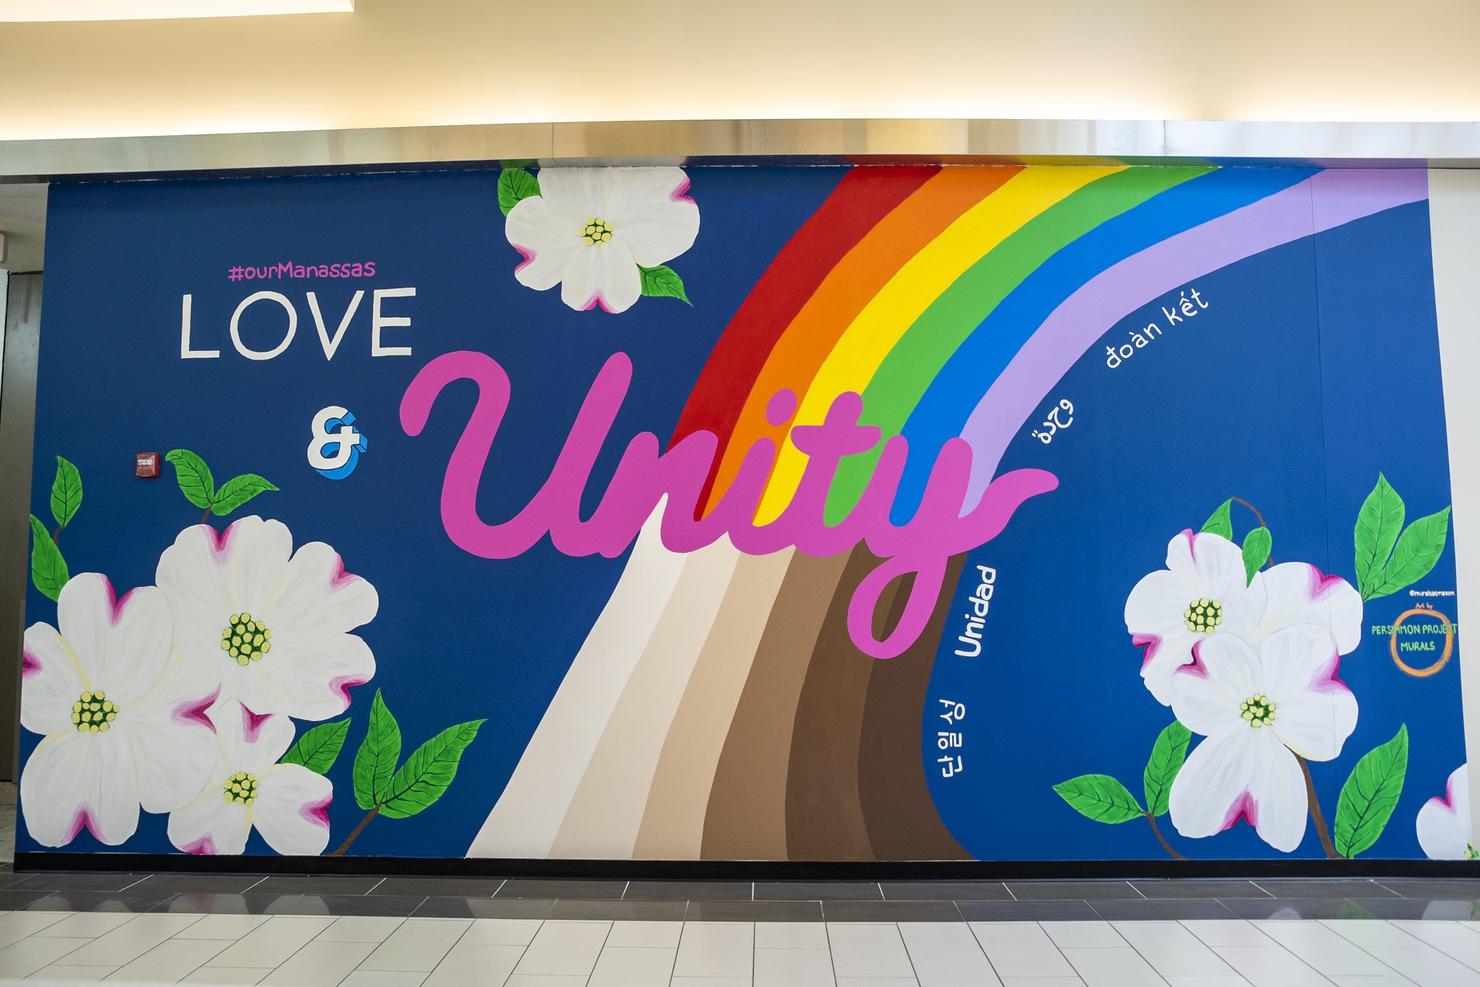 Mural says LOVE & Unity, with a rainbow, dogwood flowers, and the word "unity" in multiple languages